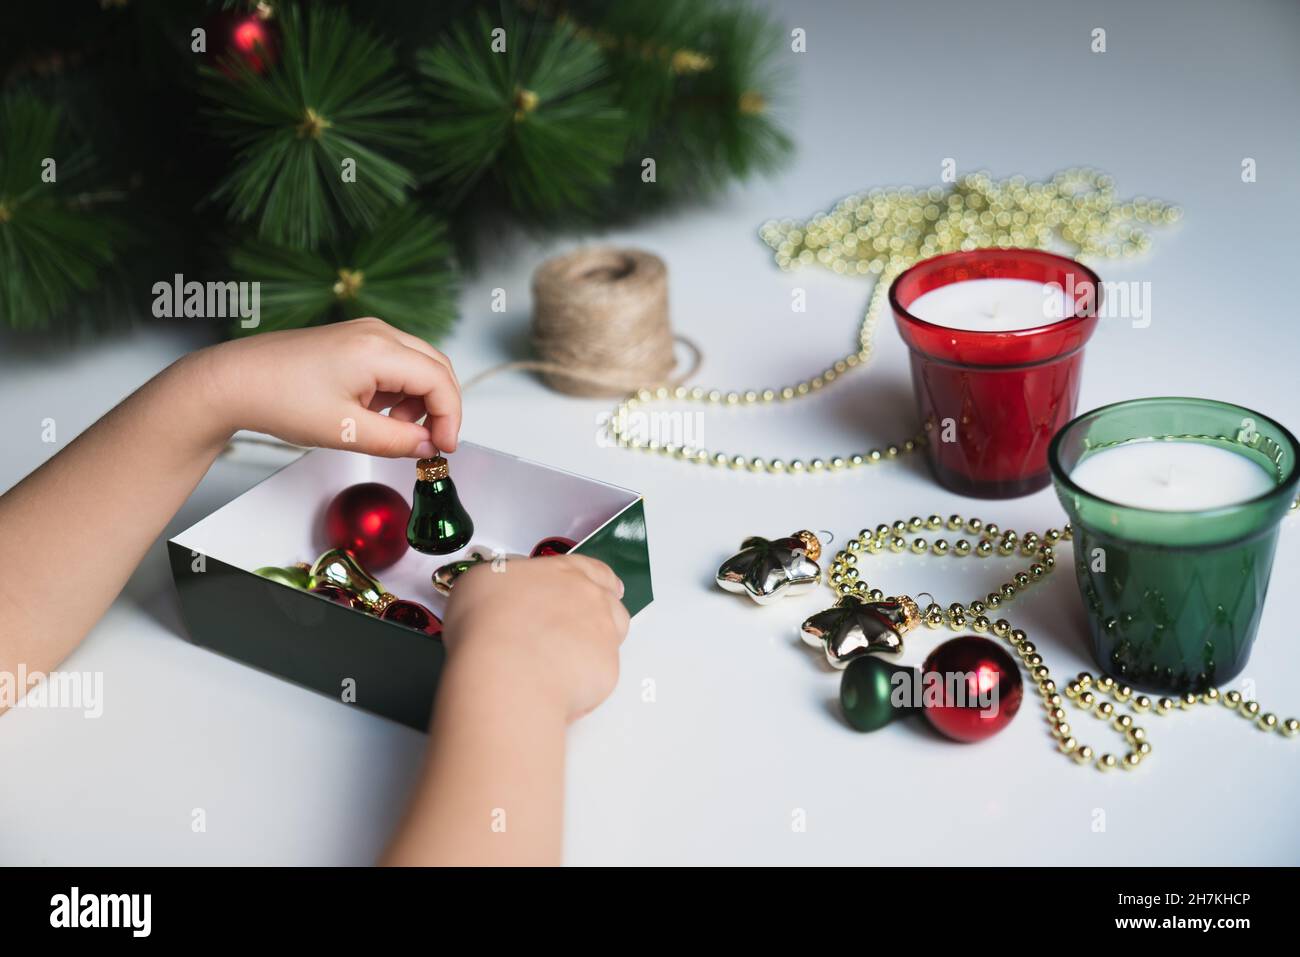 Ð¡ropped hands of a child taking out christmas decorations from a box Stock Photo